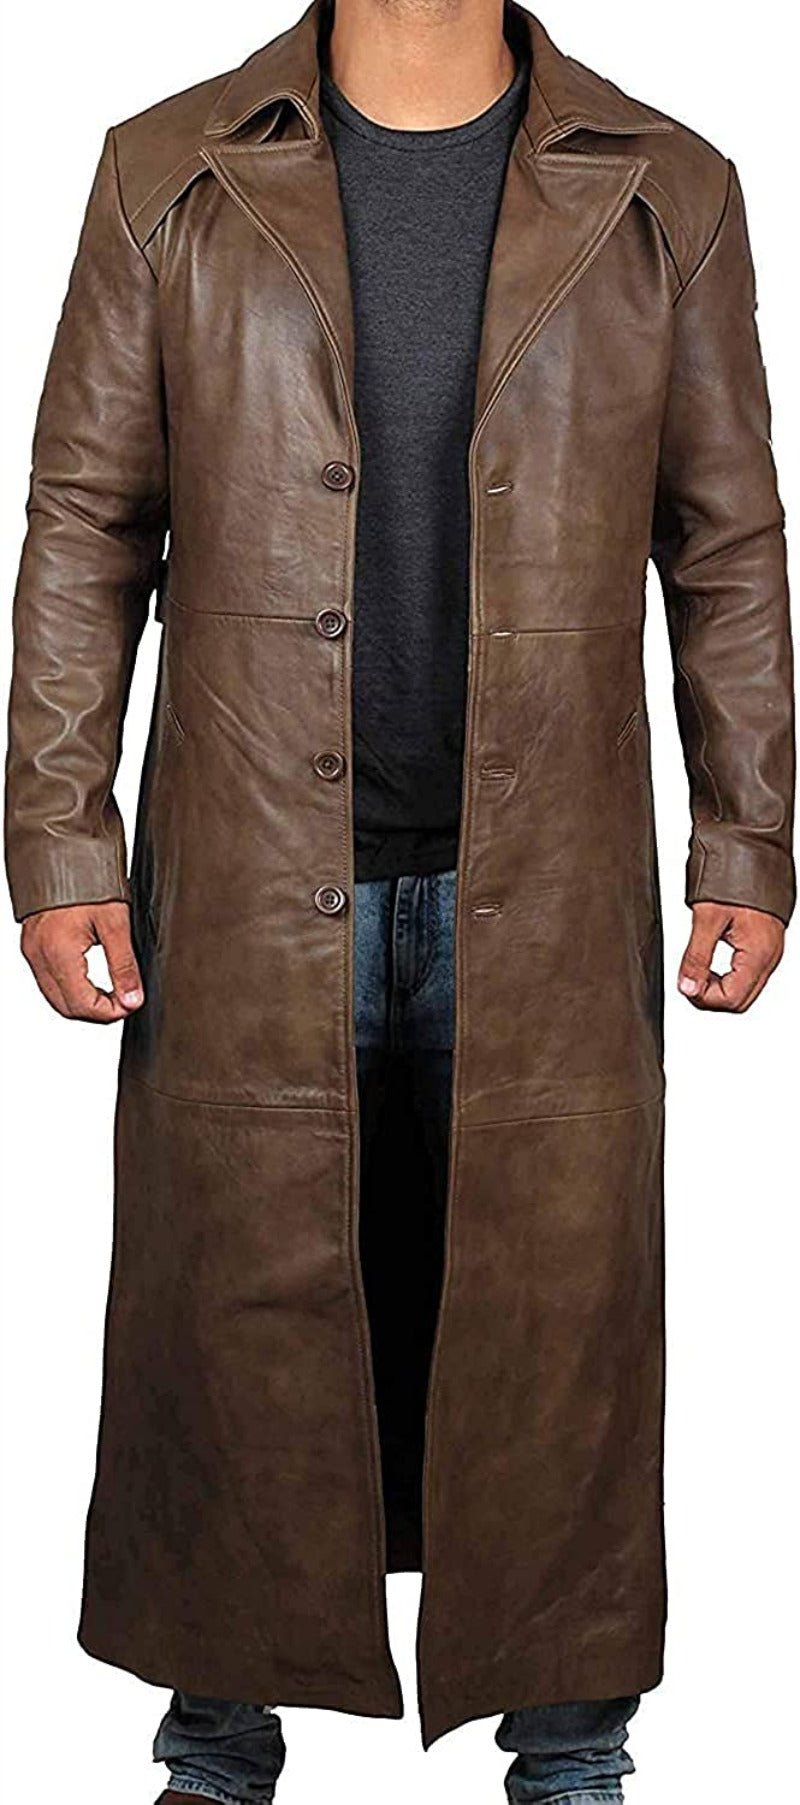 mens leather trench coat full length light brown distressed color